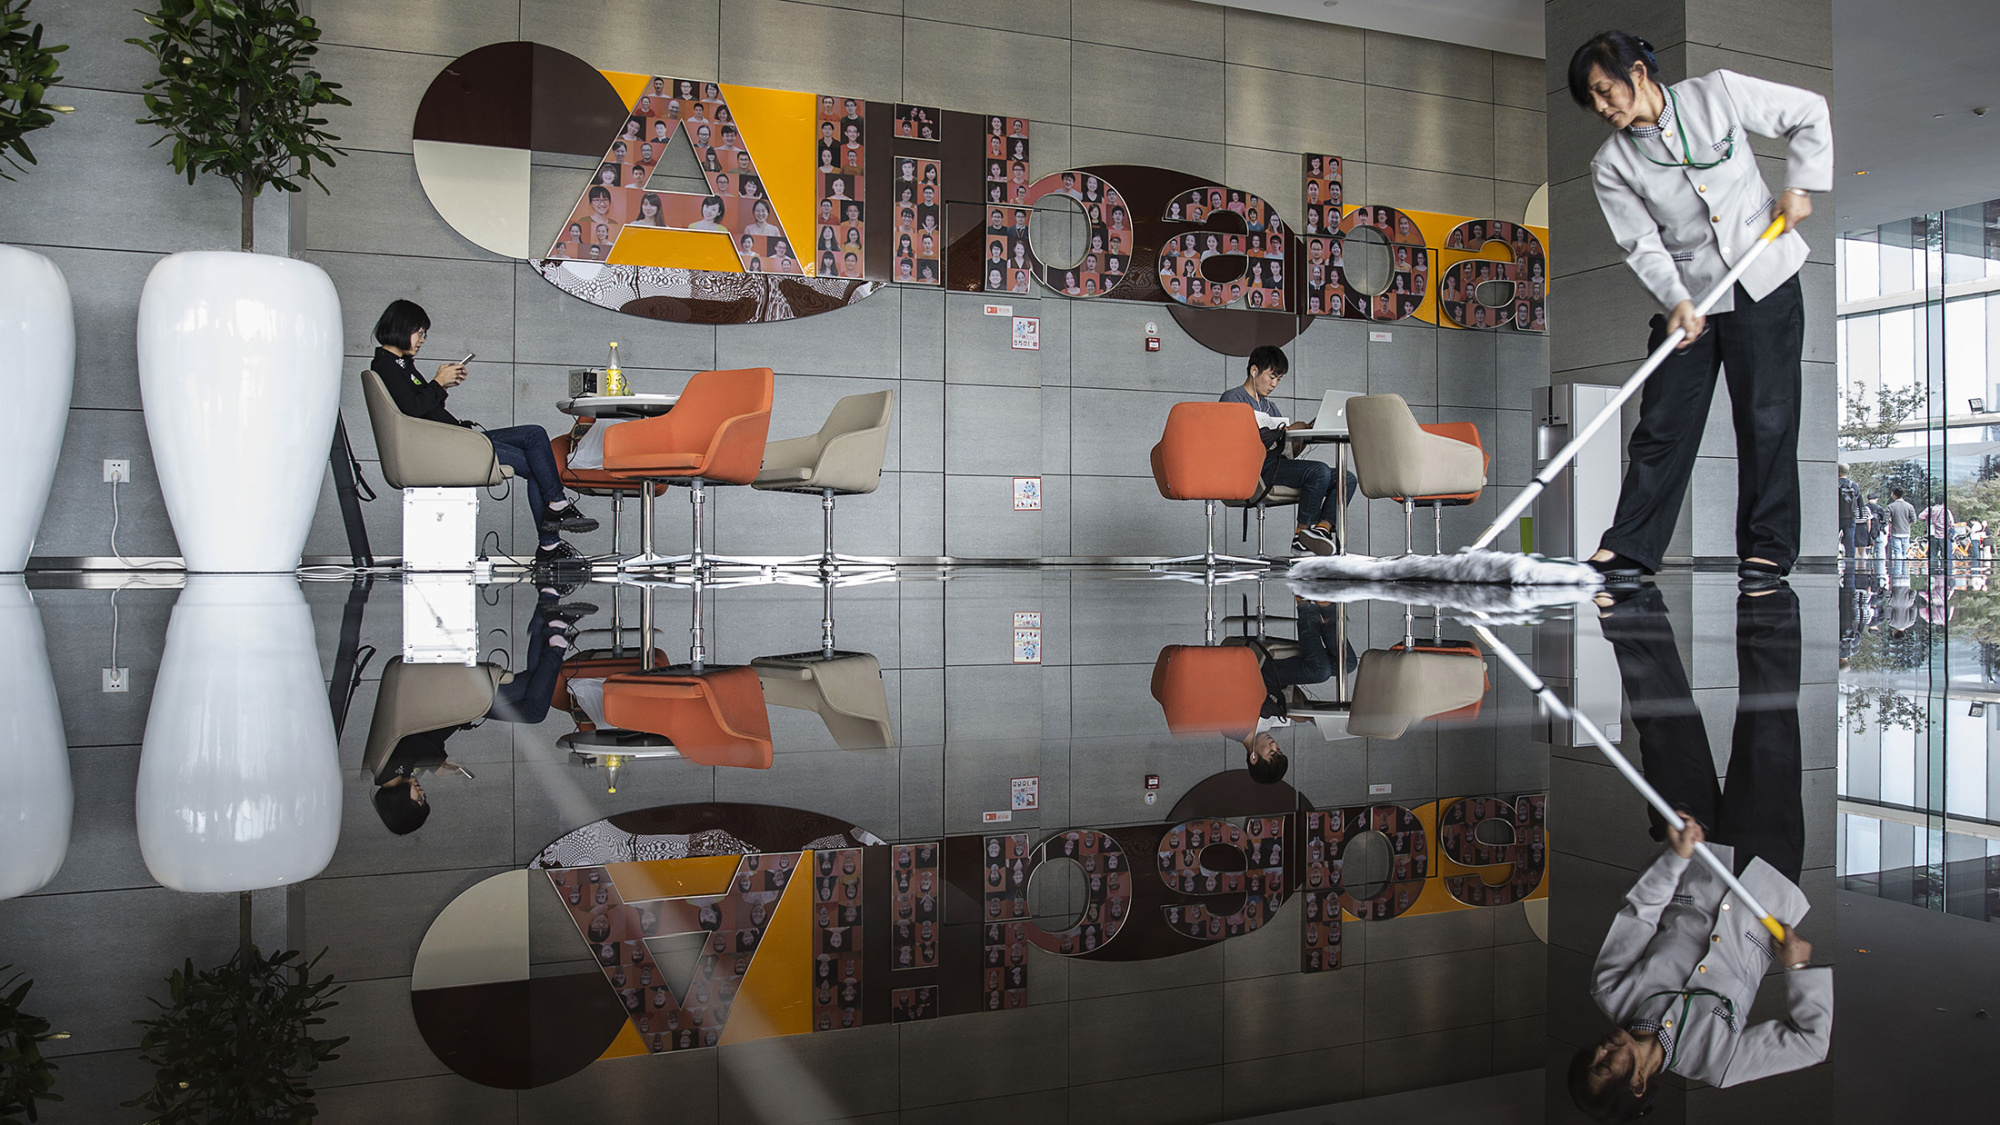 An employee mops the floor in a building lobby at the Alibaba Group Holding Ltd. headquarters in Hangzhou, China, on Tuesday, Oct. 13, 2015. Alibaba's bet on data technology is driving greater investment in areas including ways to protect user privacy as it battles Amazon.com Inc. for customers globally.
